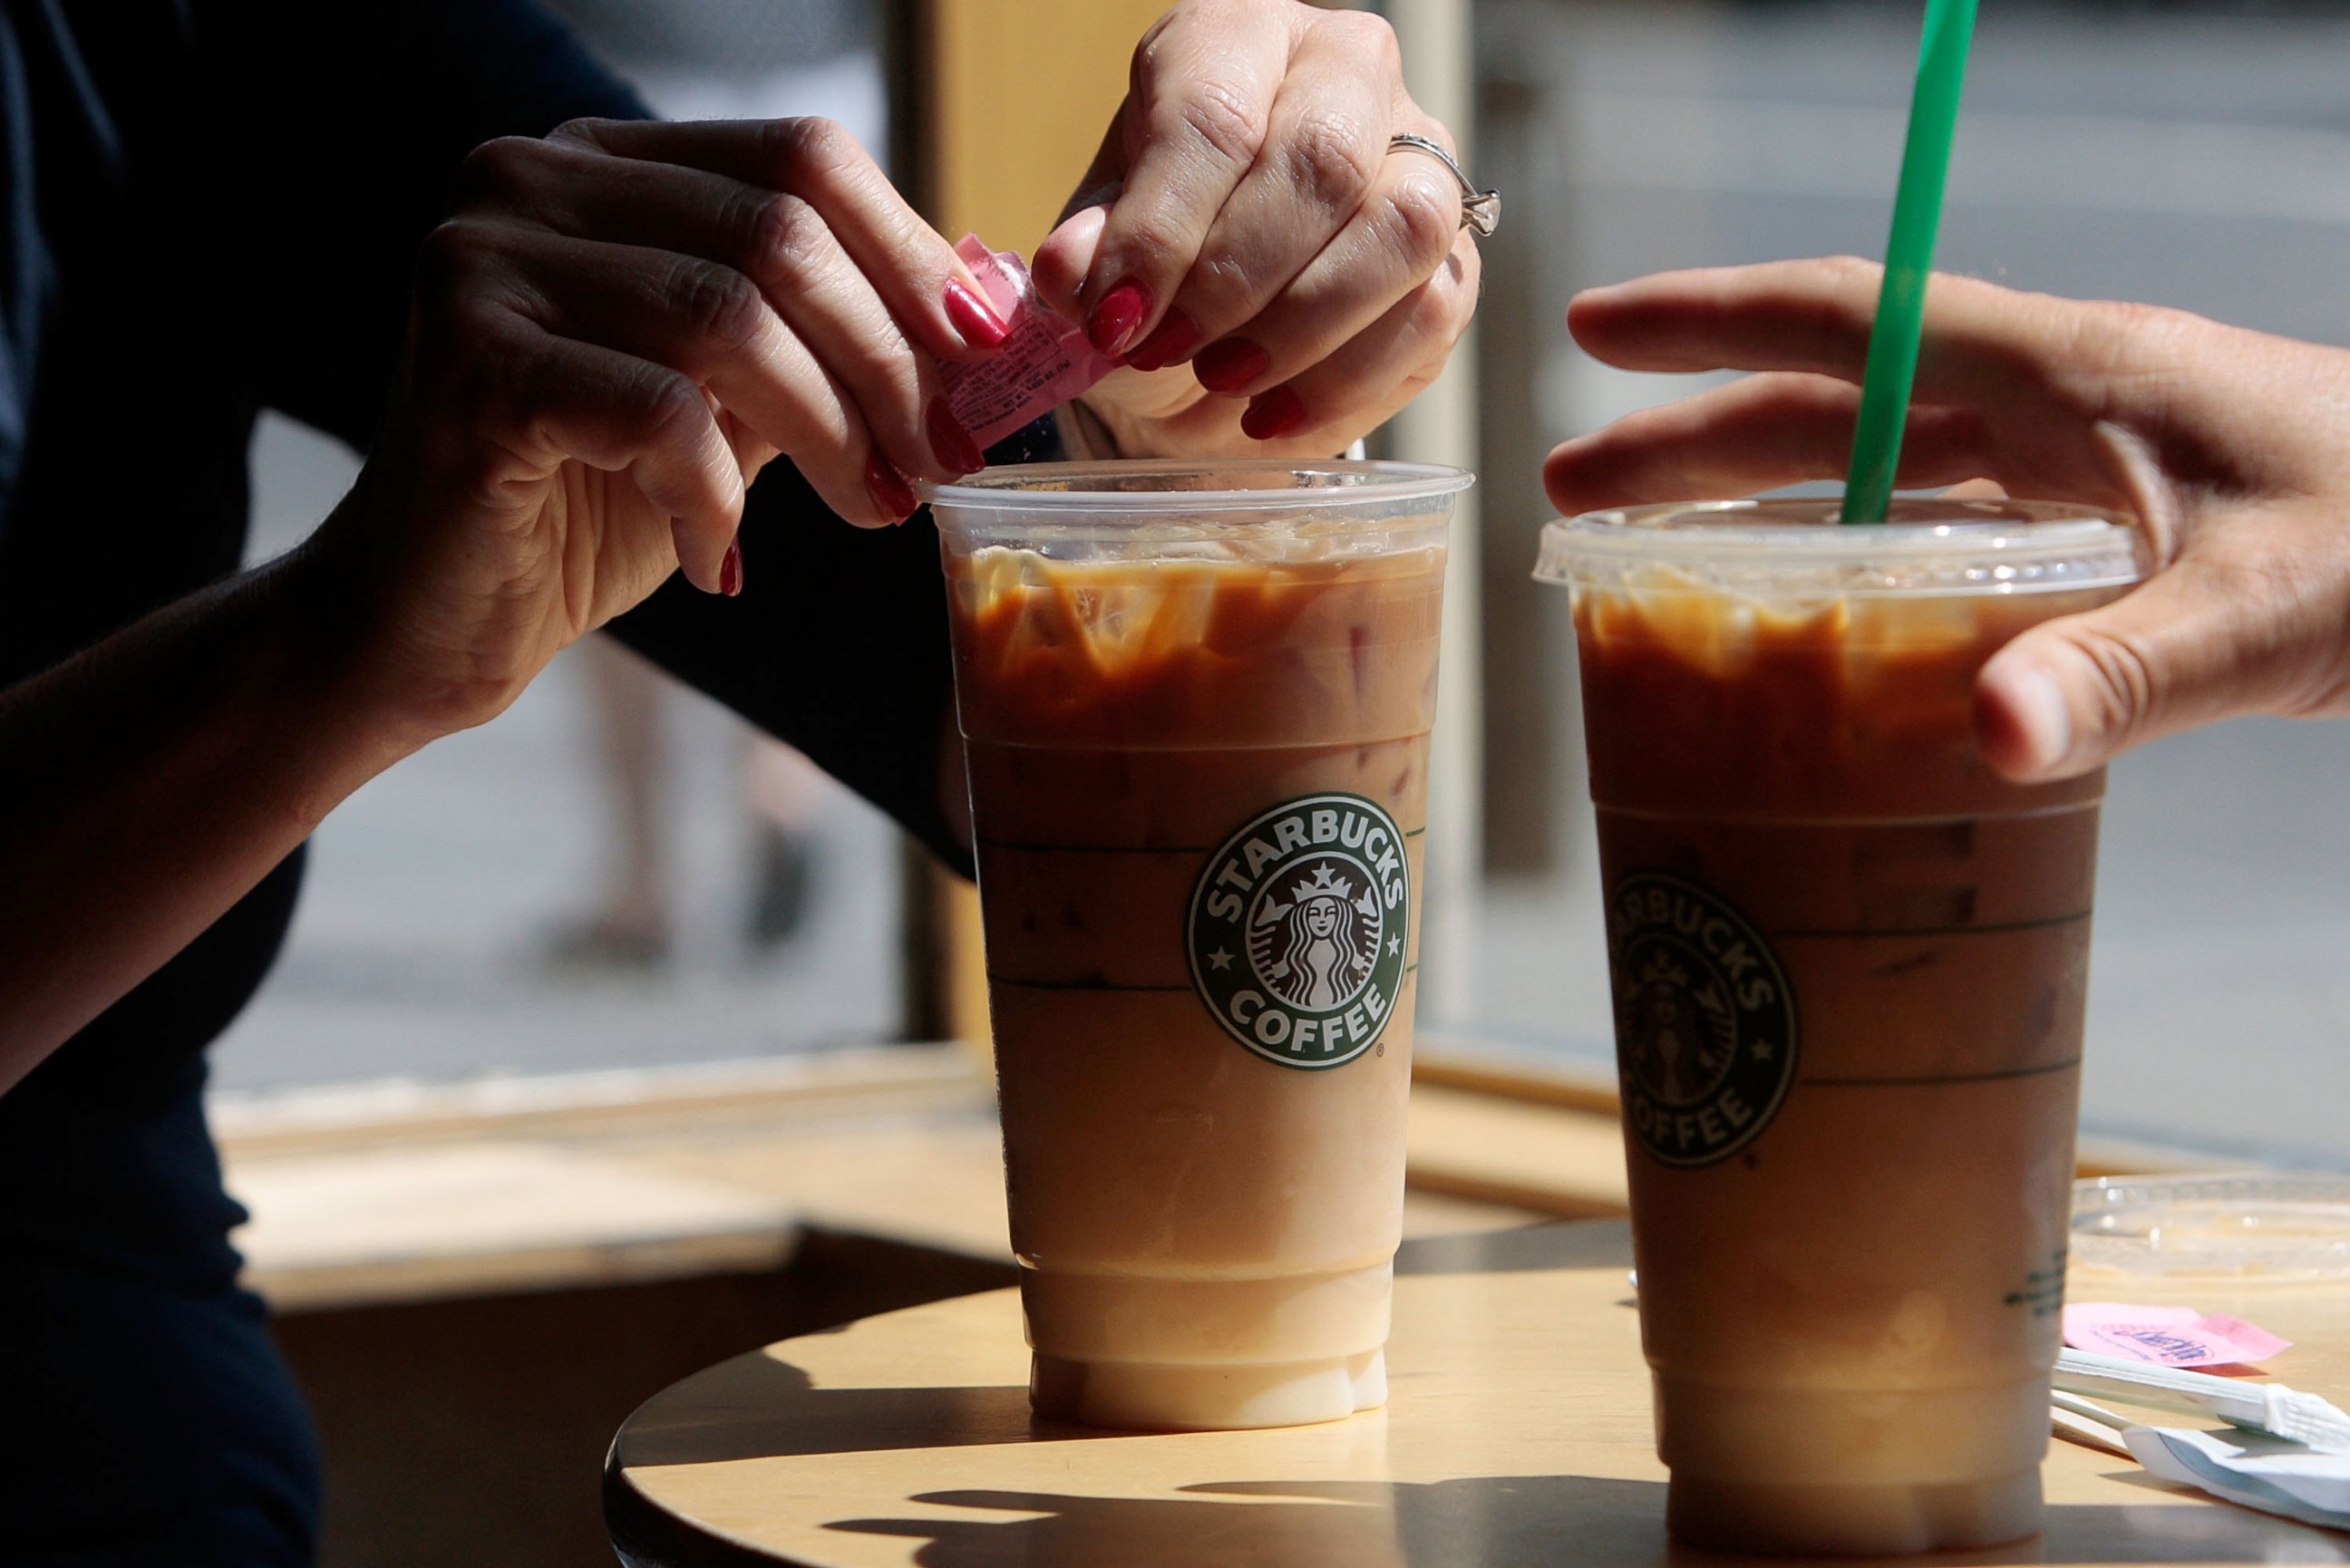 PHOTO: A couple has iced coffee drinks at a Starbucks Coffee shop in lower Manhattan, New York.